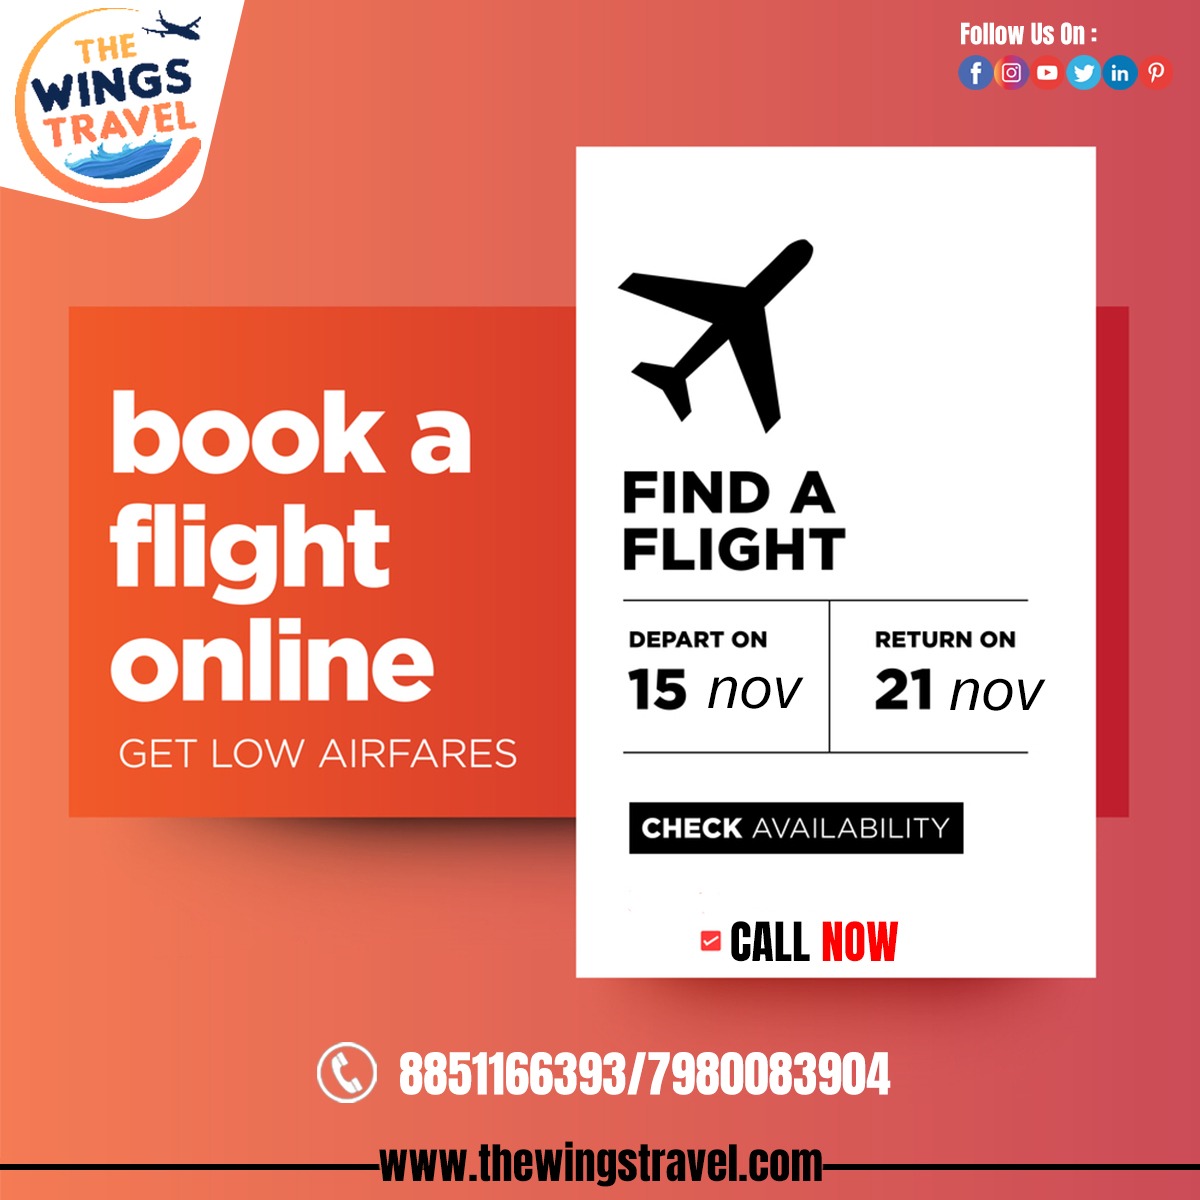 The Wings Travel offers great deals on air tickets.😊 Book flights for all destinations across India.✈

#thewingstravel #flightbooking #travel #flight #booking #travelling #cheapflights #flights #flightdeal